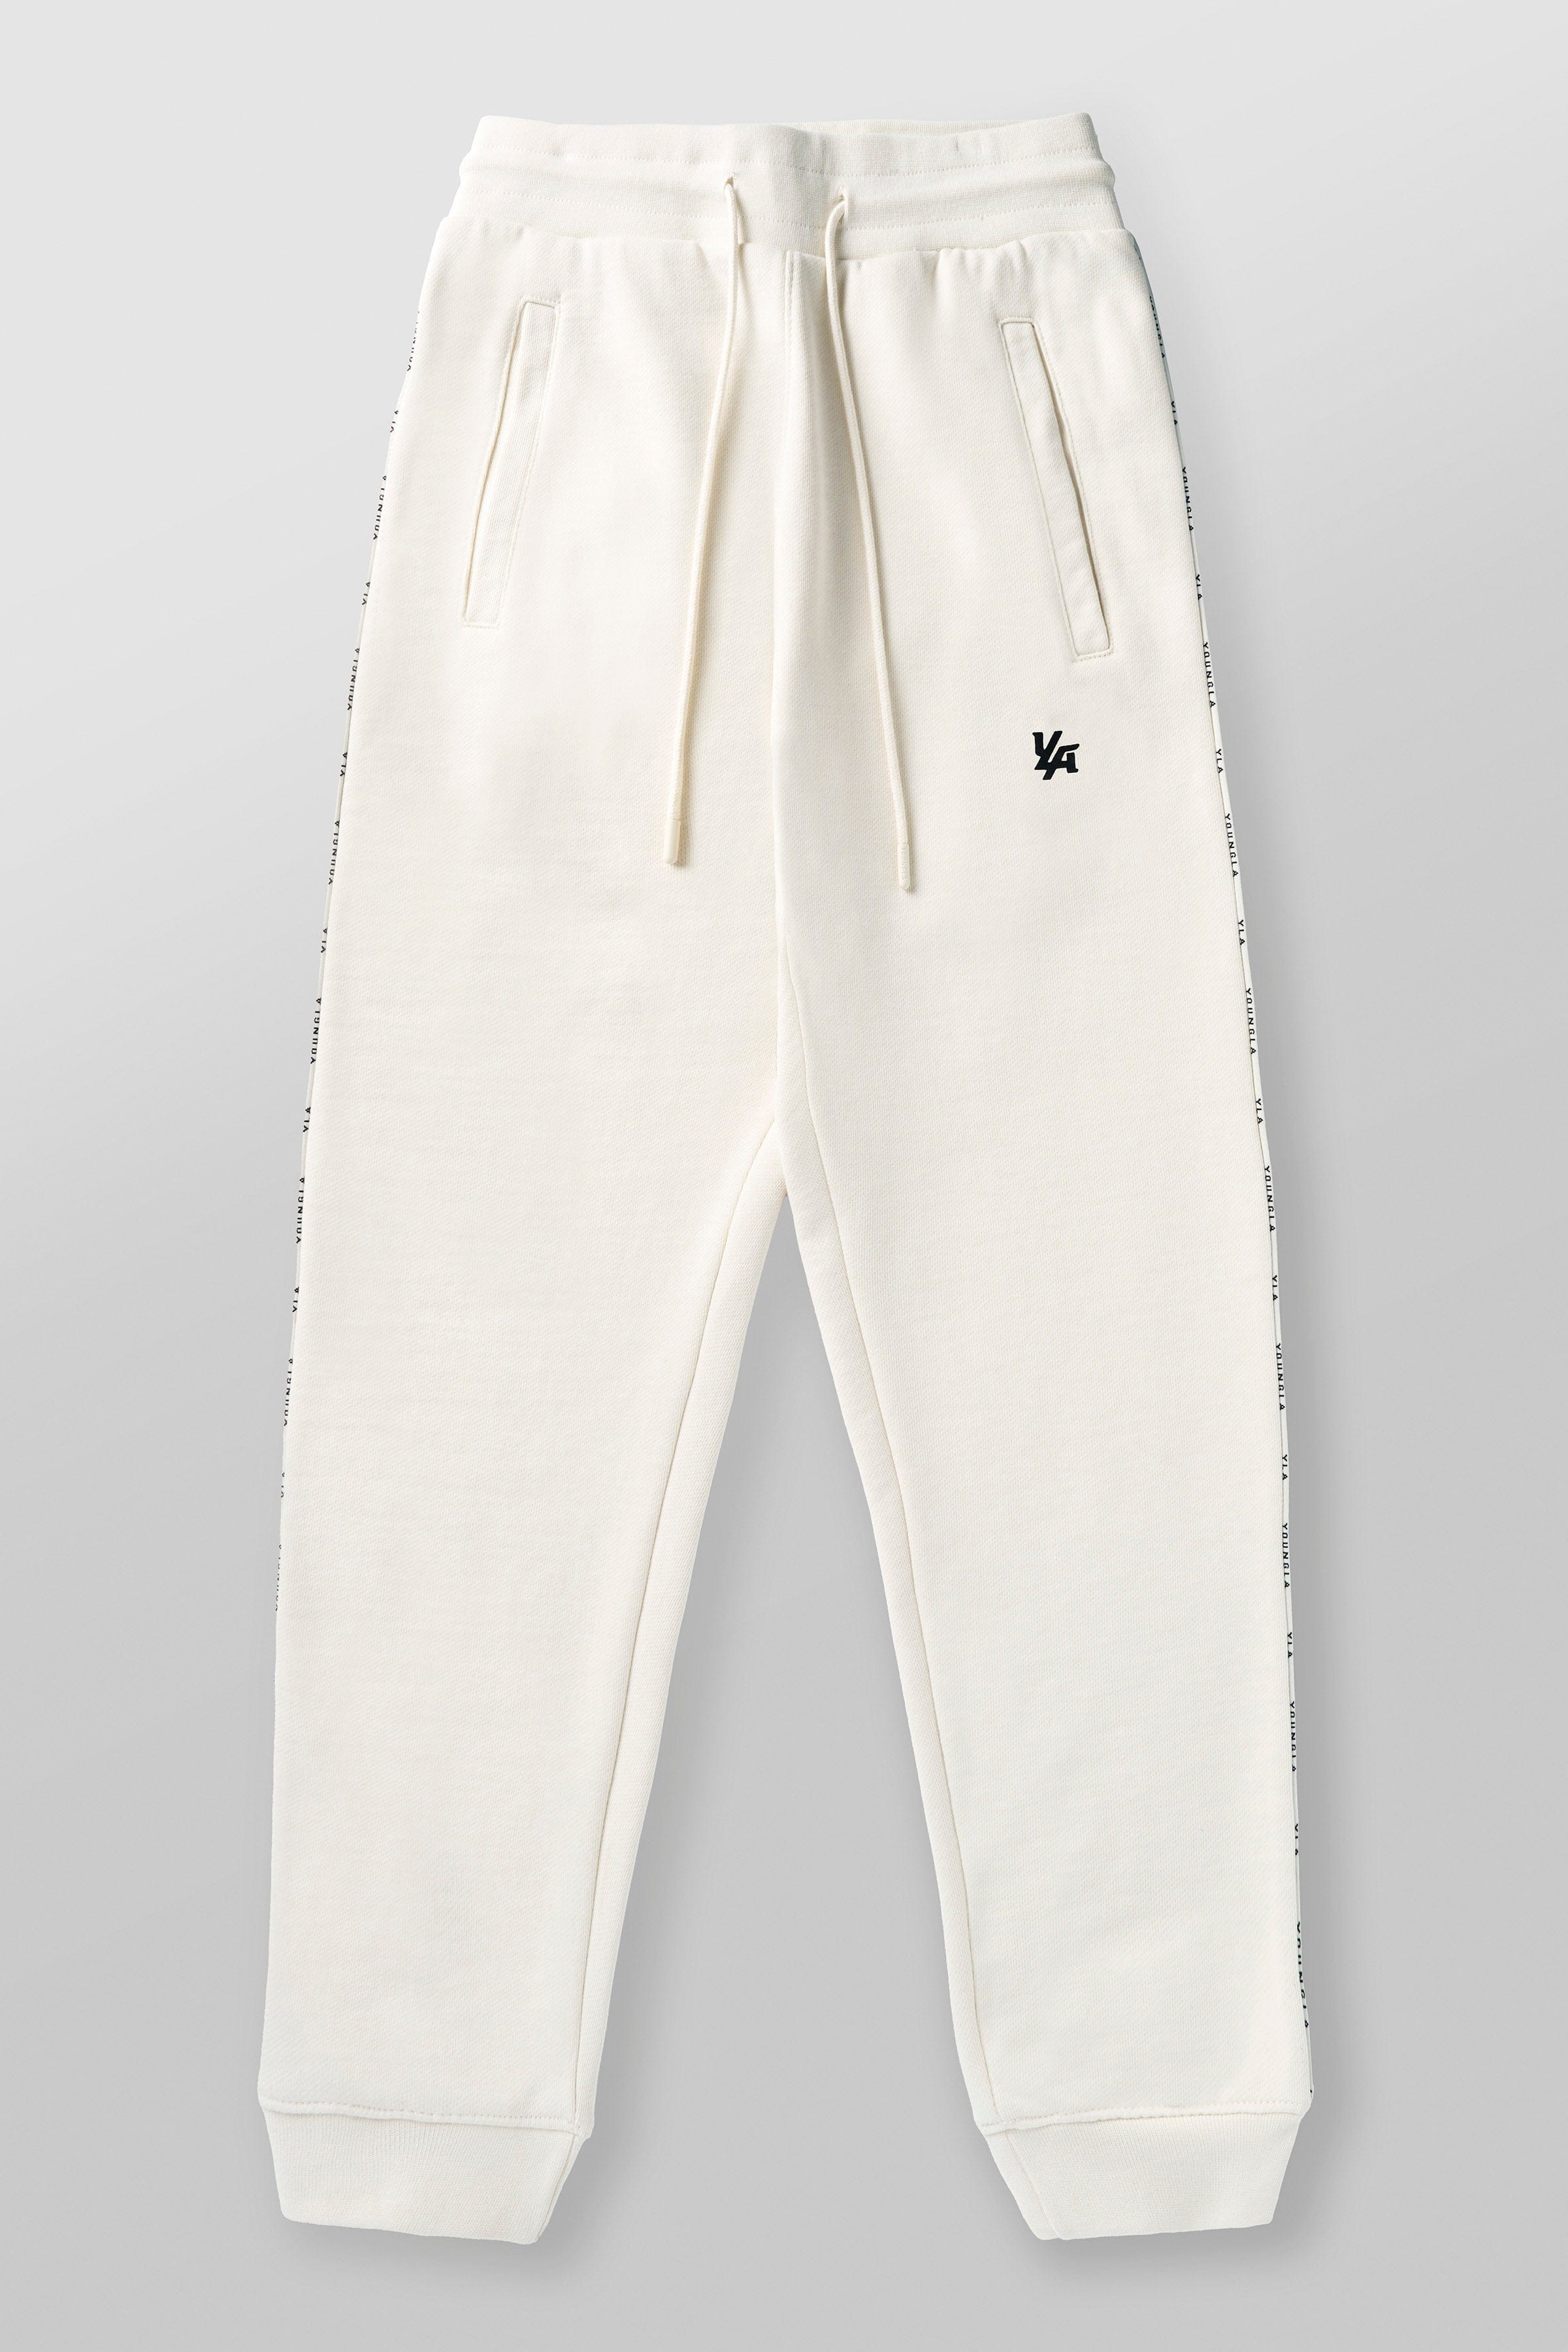 Prime Picks YoungLA Sale Collection For Him Joggers For Him Apparel White  XLarge - YoungLA Winnipeg Downtown